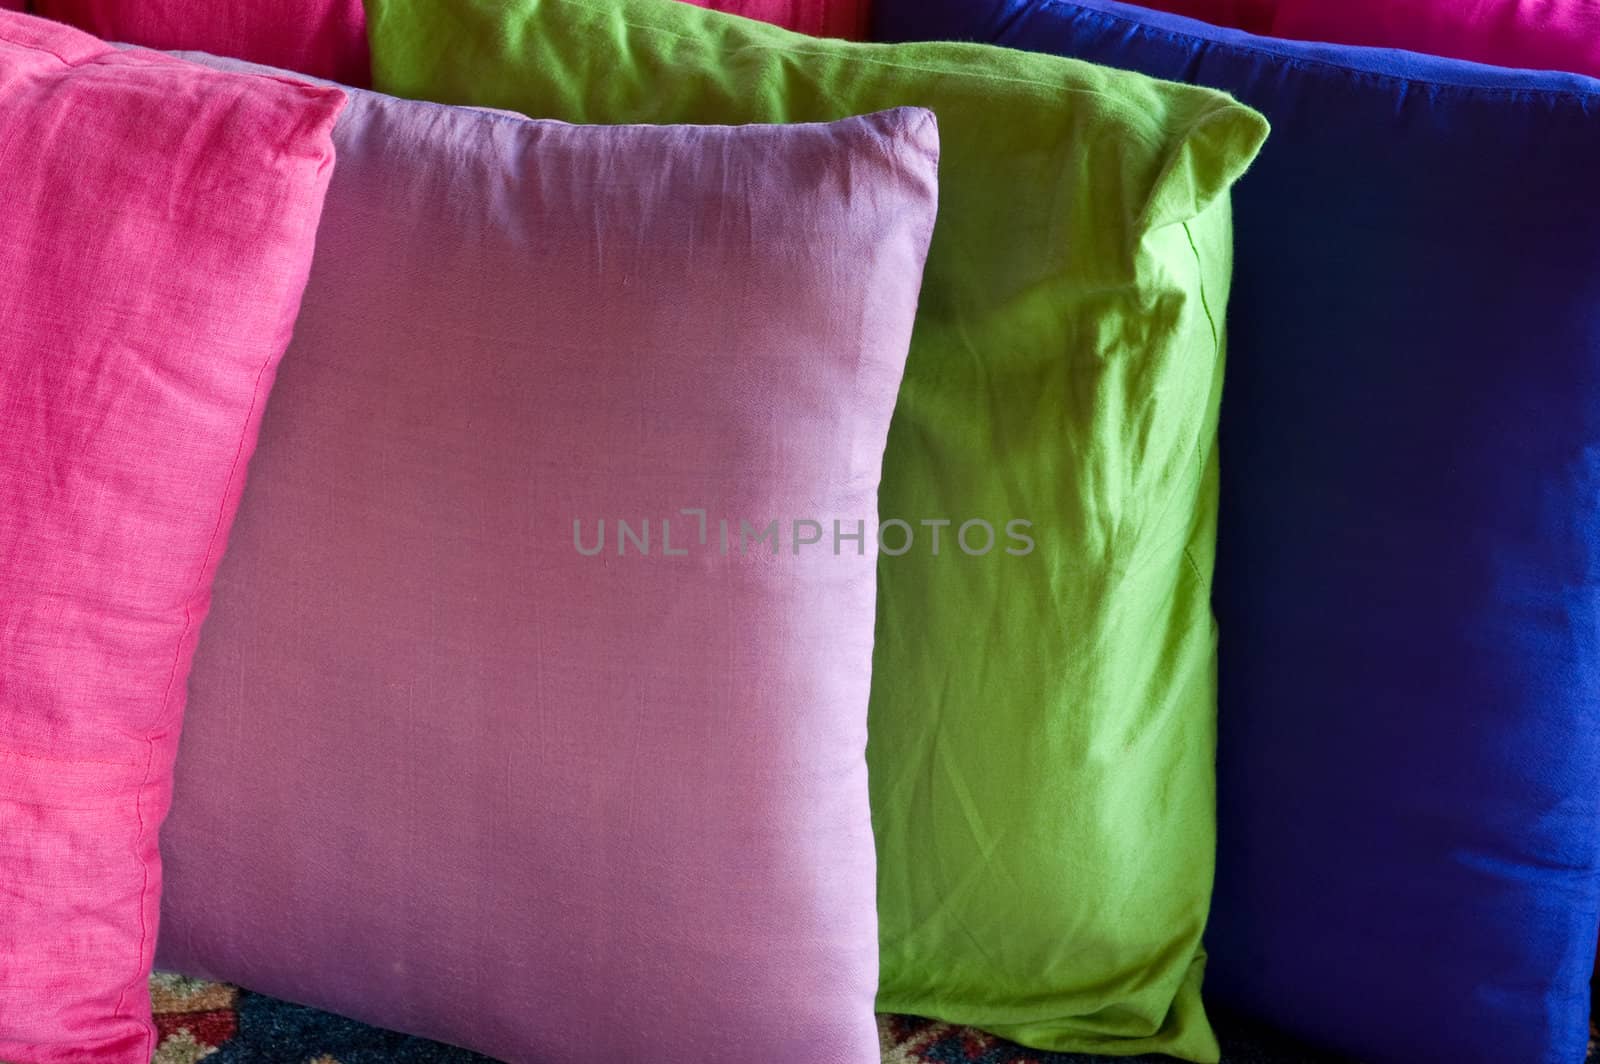 Close up of vividly colorful pillows